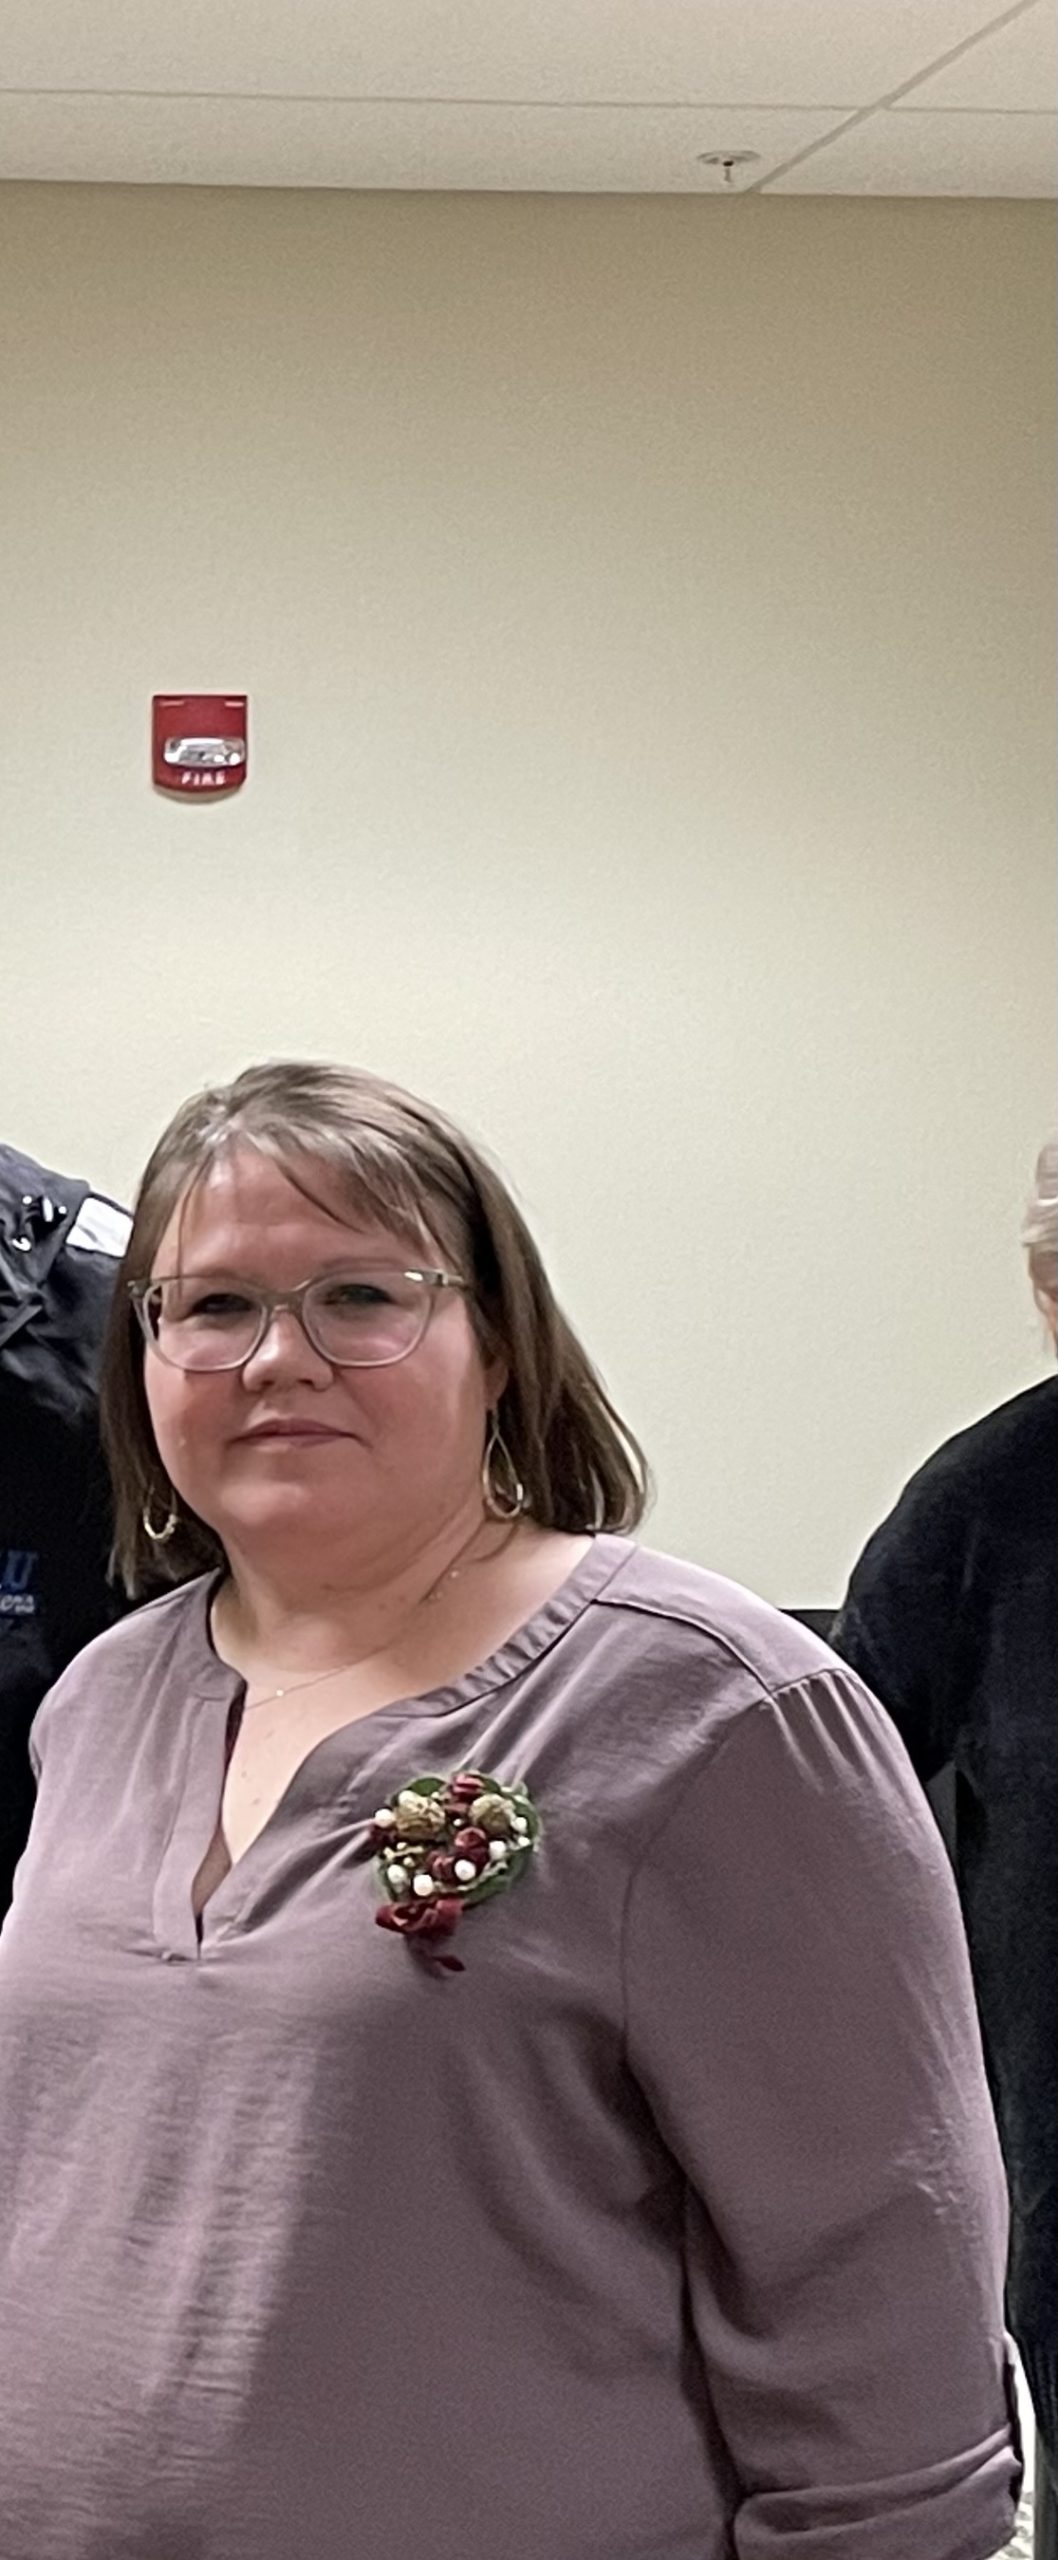 Seward County Republicans Appoint Mary Rose as County Treasurer